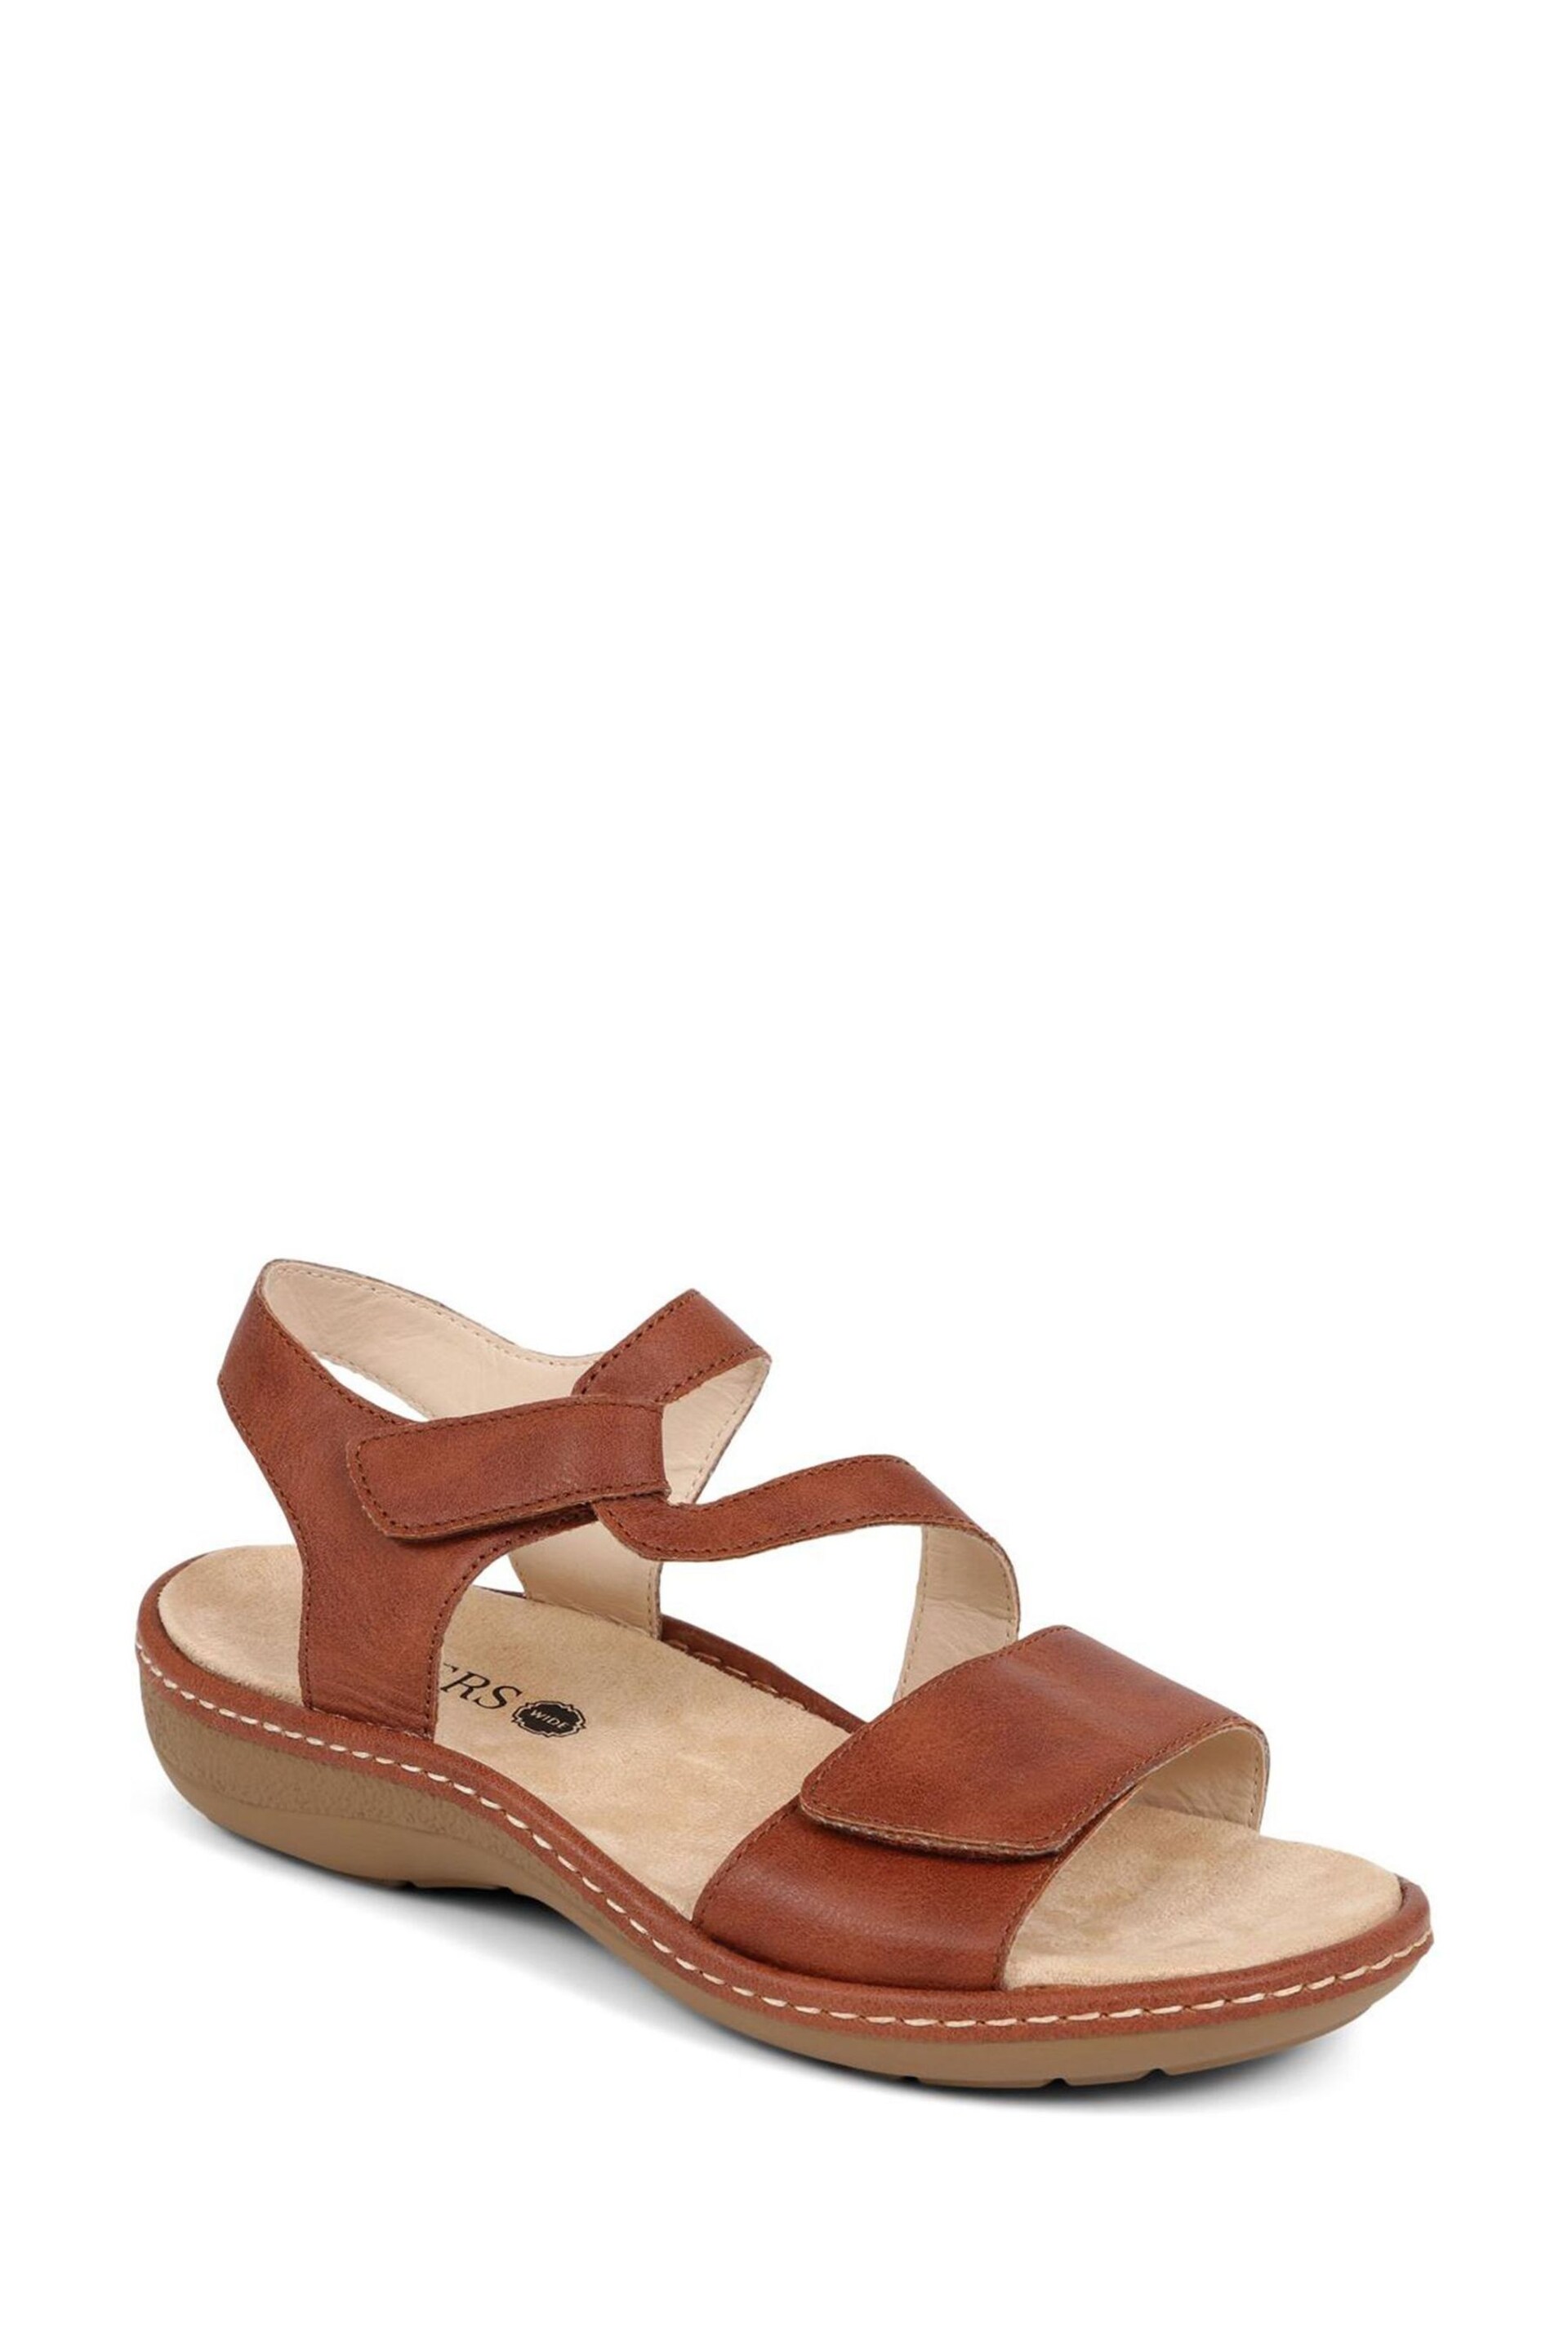 Pavers Adjustable Touch Fastening Brown Sandals - Image 3 of 5